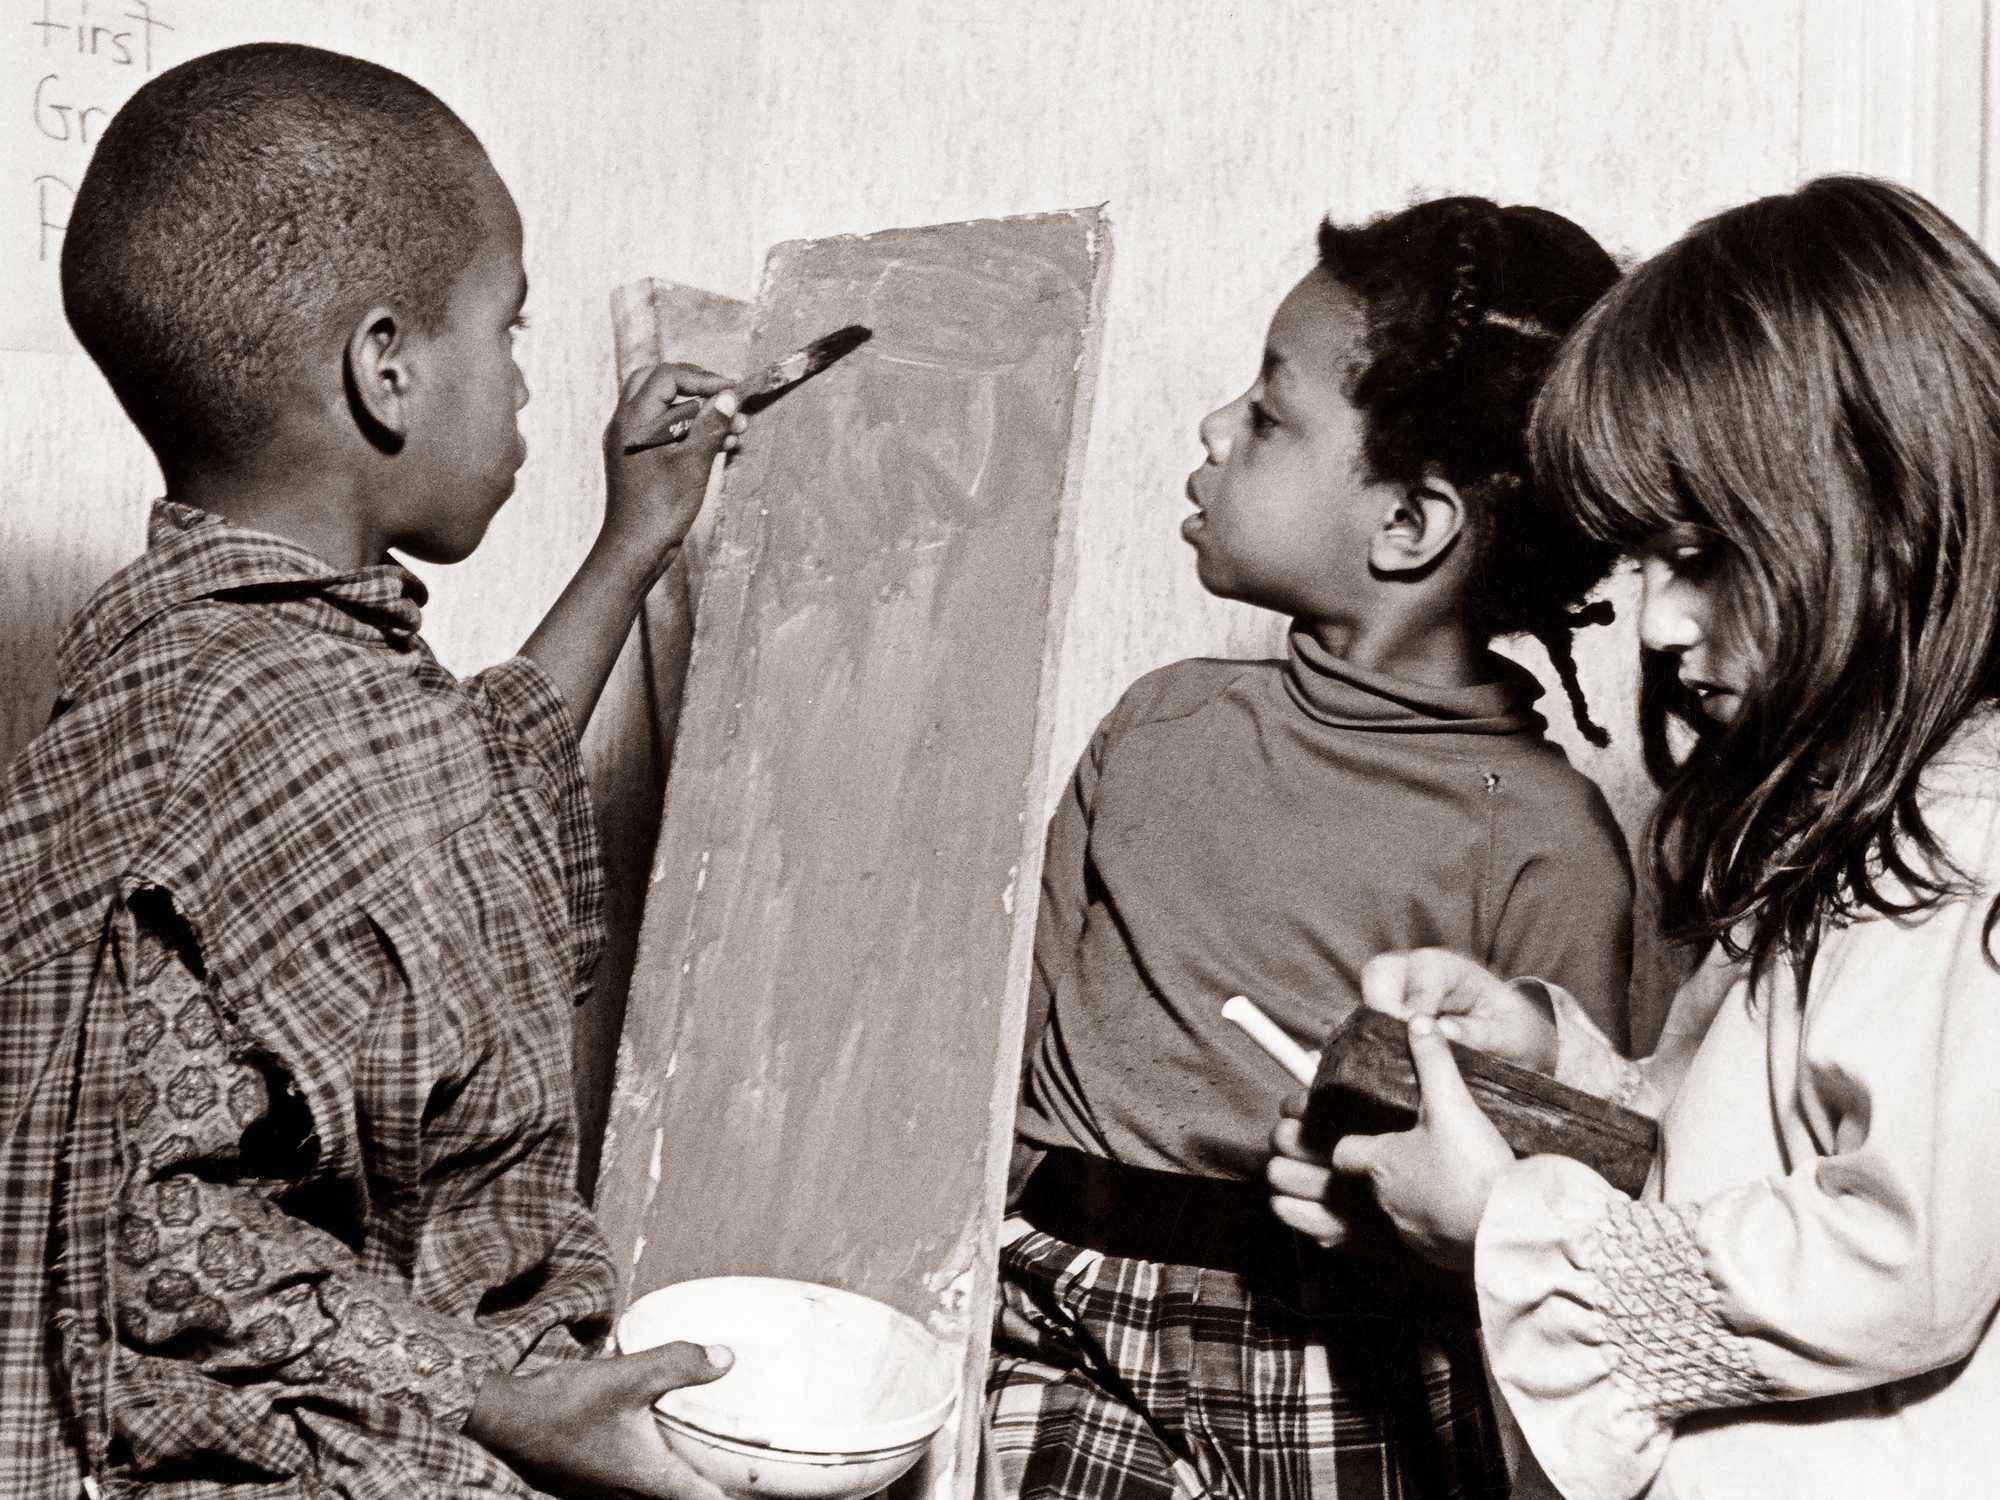 Students painted together in 1966 at the Roxbury Community School, one of many institutions that opened as alternatives for Black students failed by Boston Public Schools. (Charles Dixon/Globe Staff)